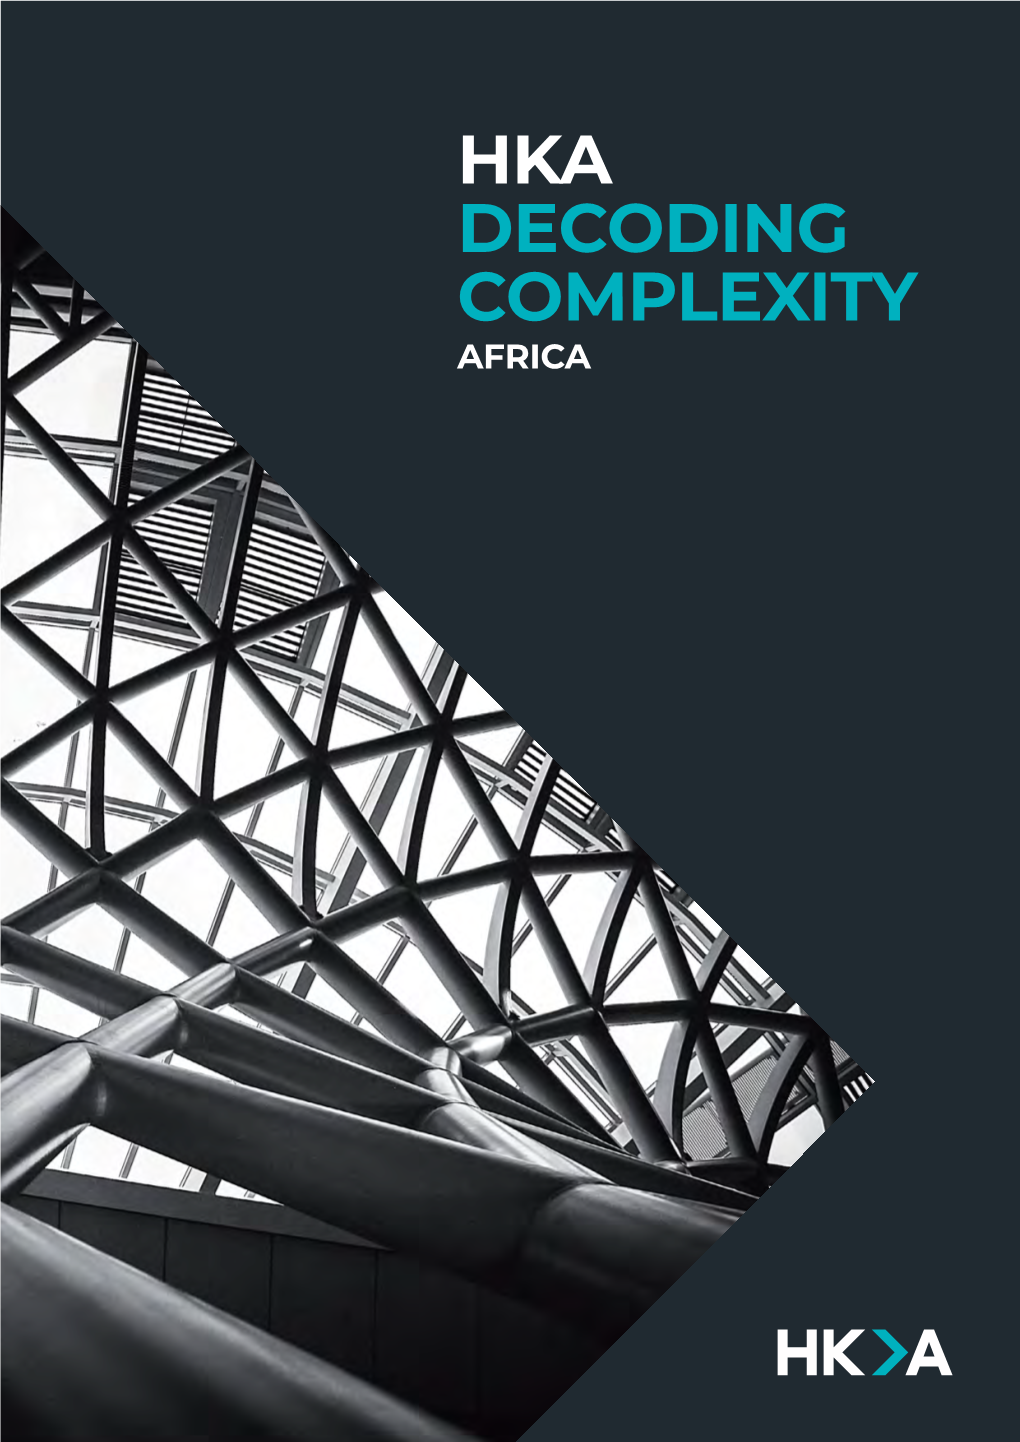 HKA DECODING COMPLEXITY AFRICA Contents